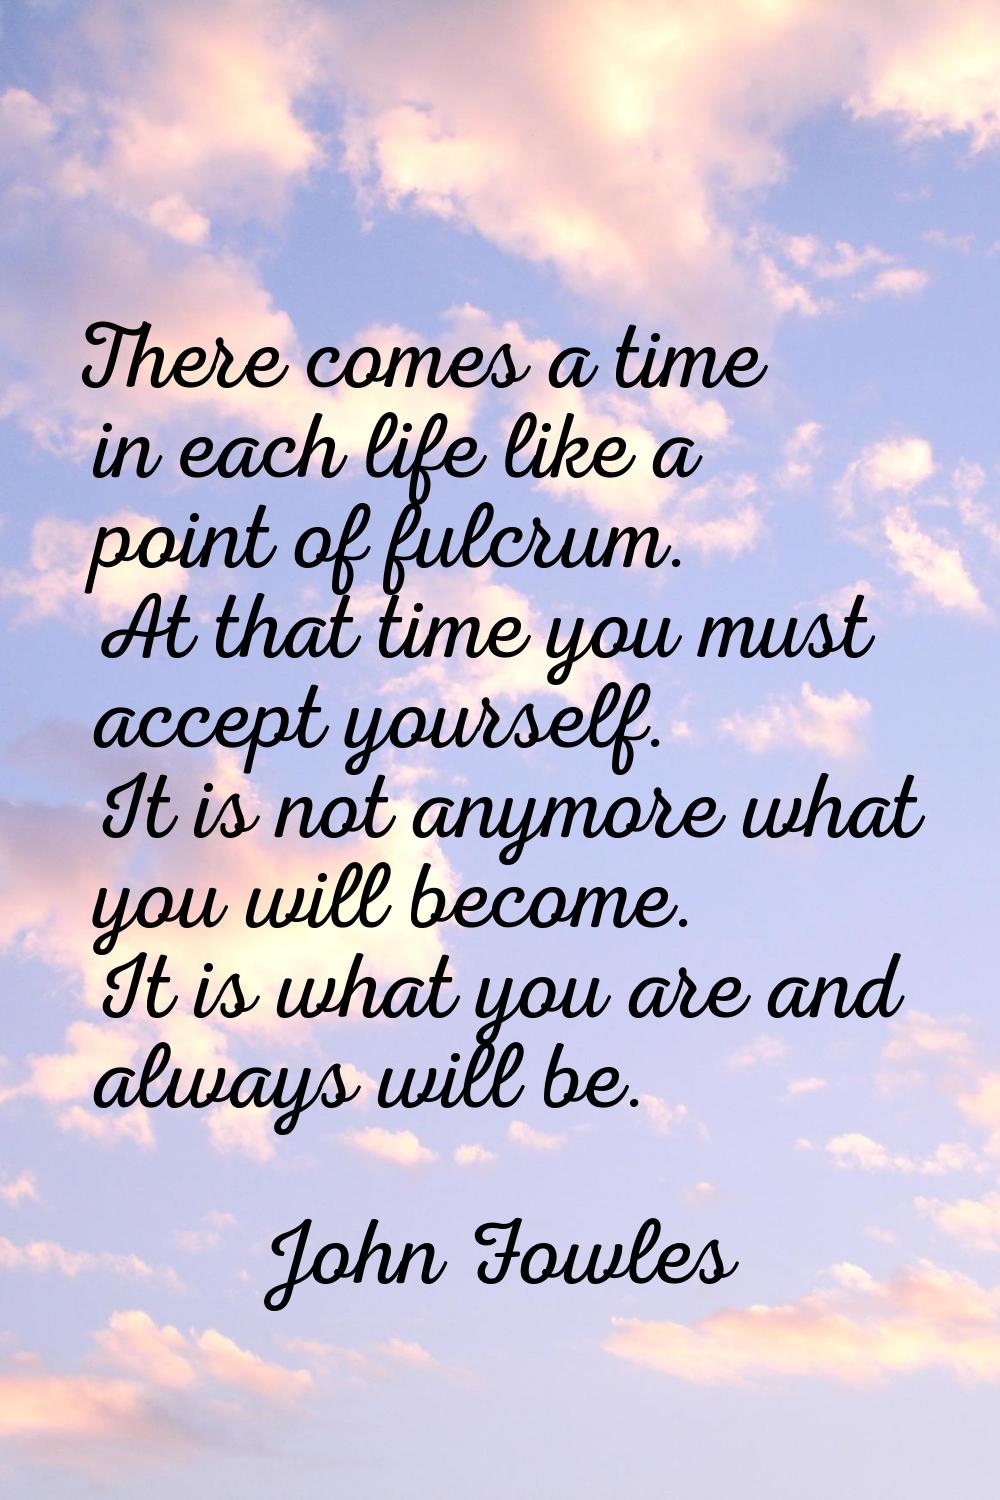 There comes a time in each life like a point of fulcrum. At that time you must accept yourself. It 